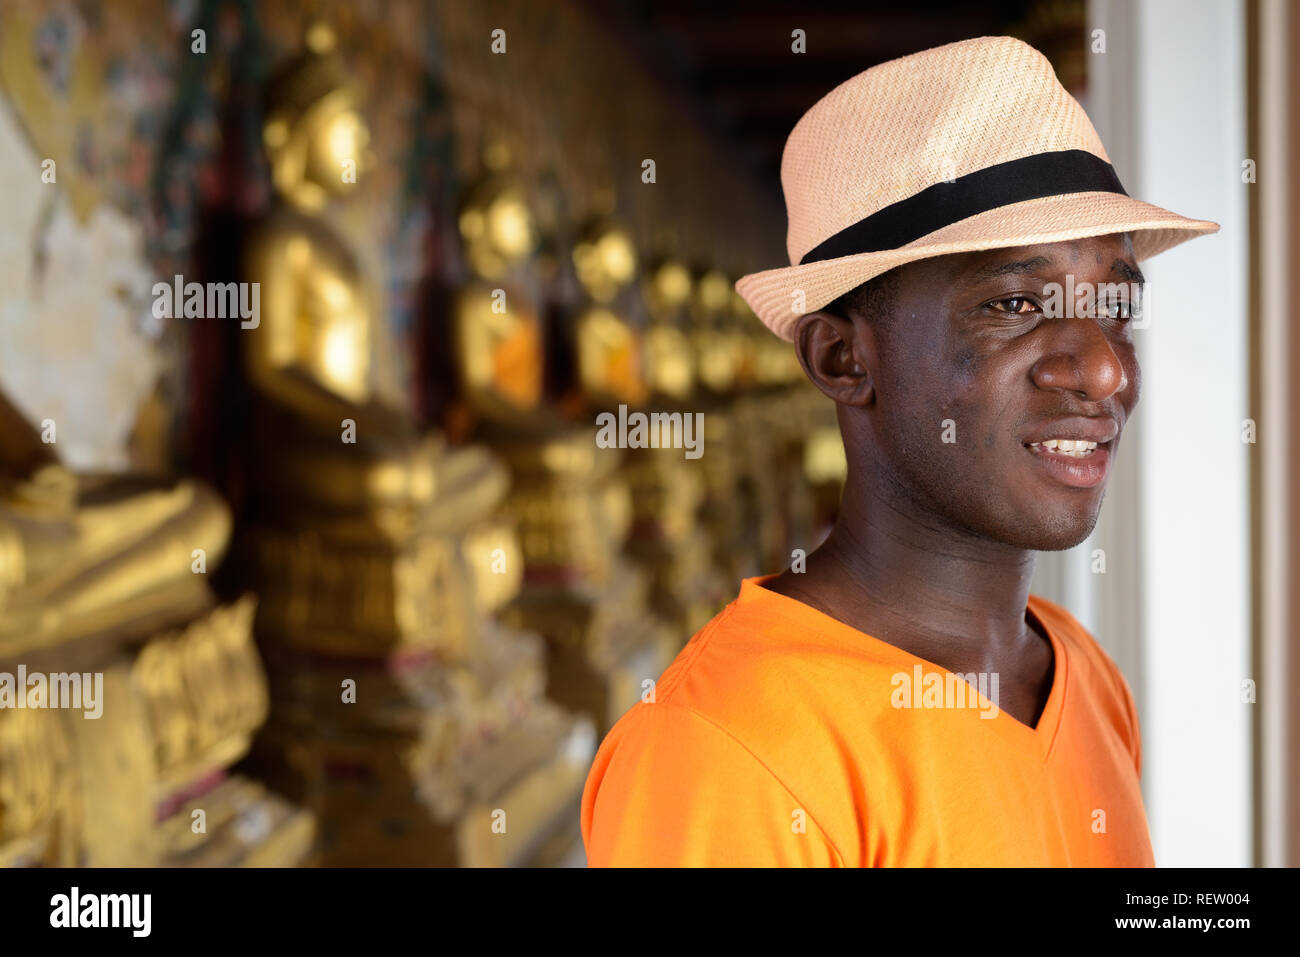 Young happy African tourist man smiling at Buddhist temple Stock Photo